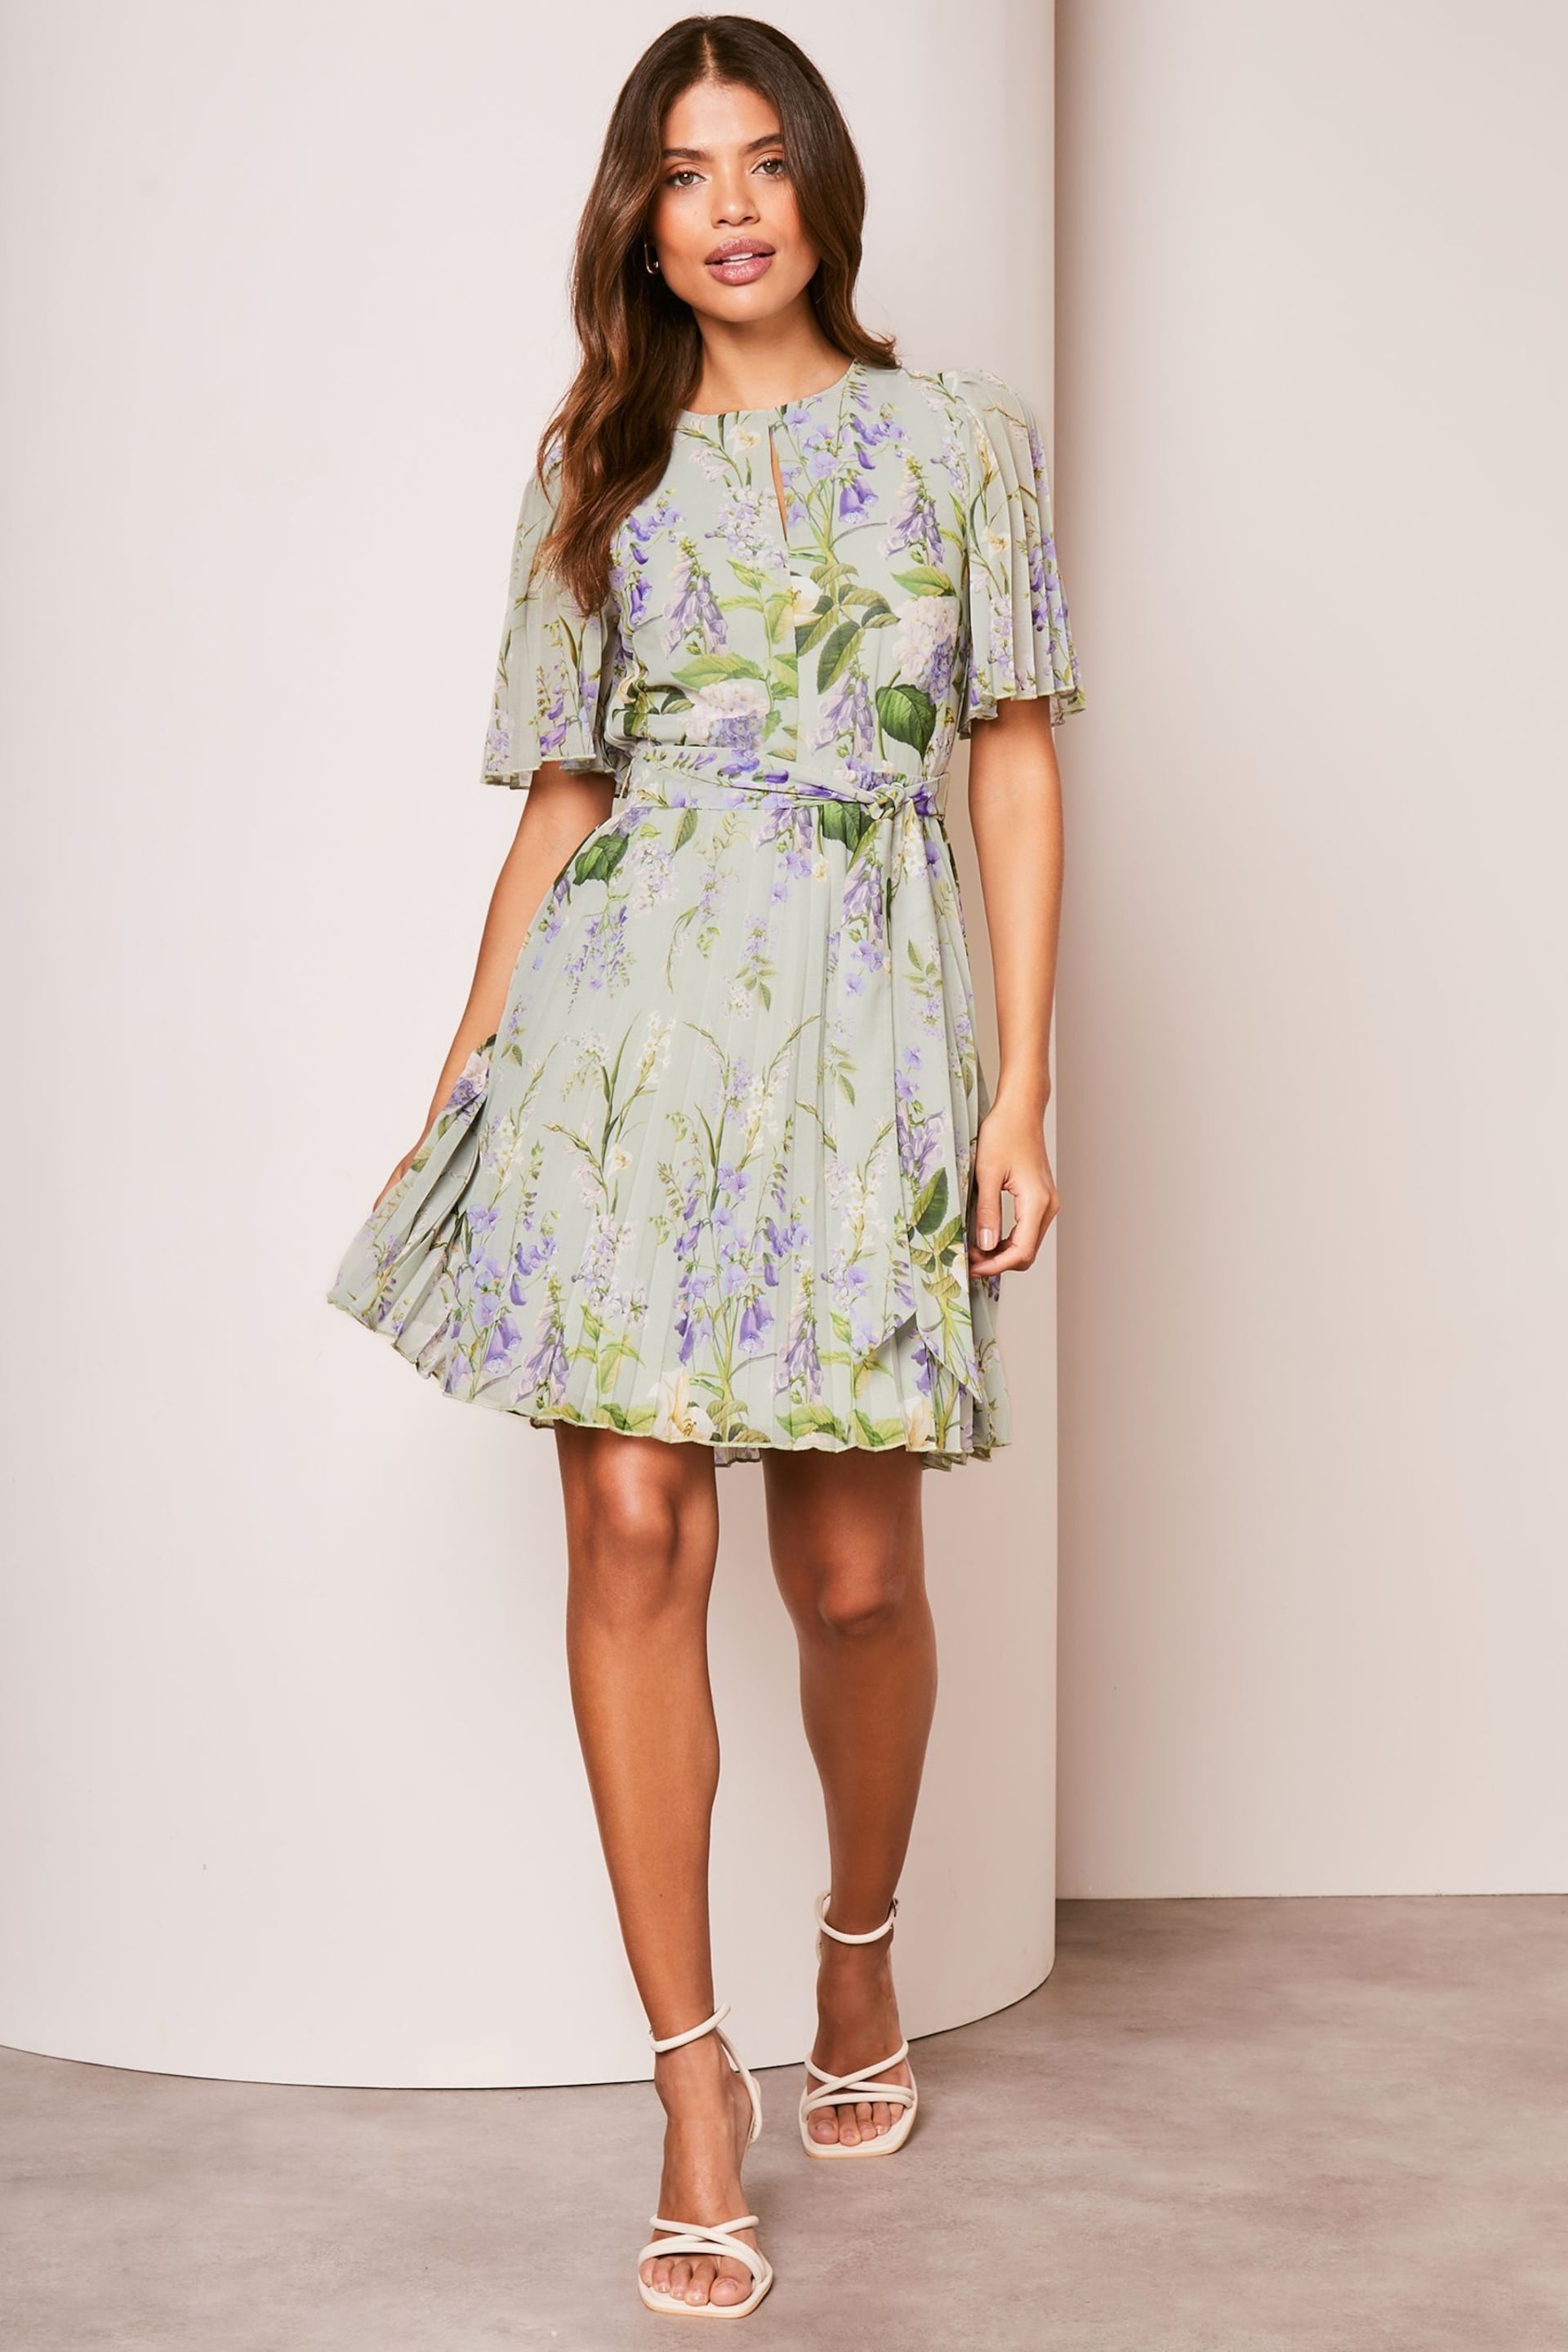 Lipsy Green Floral Print Short Flutter Sleeve Pleated Mini Dress - Image 3 of 4